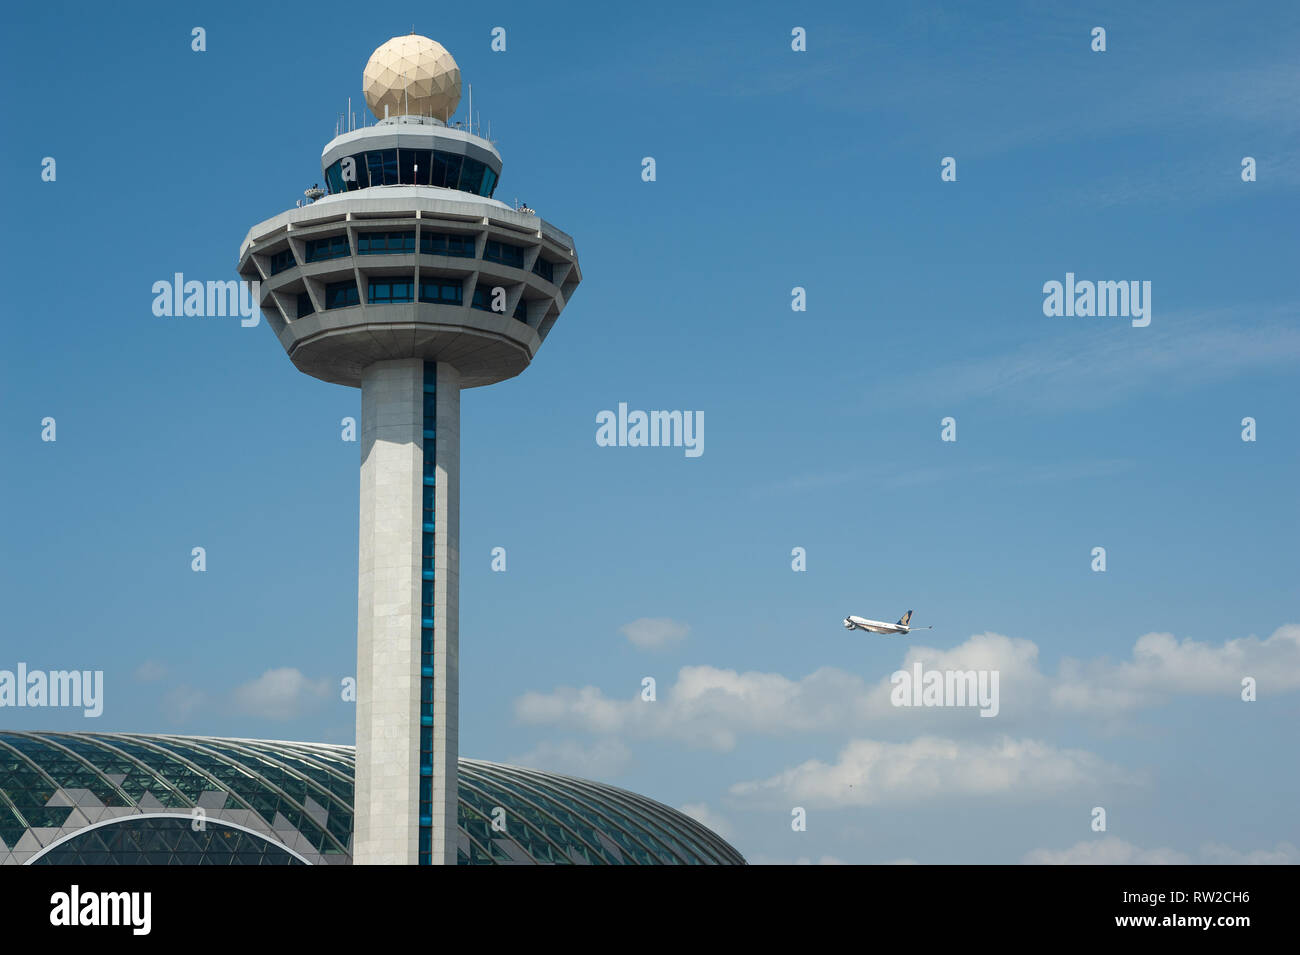 01.03.2019, Singapore, Republic of Singapore, Asia - Air traffic control tower and the new Jewel terminal at Singapore's Changi airport. Stock Photo